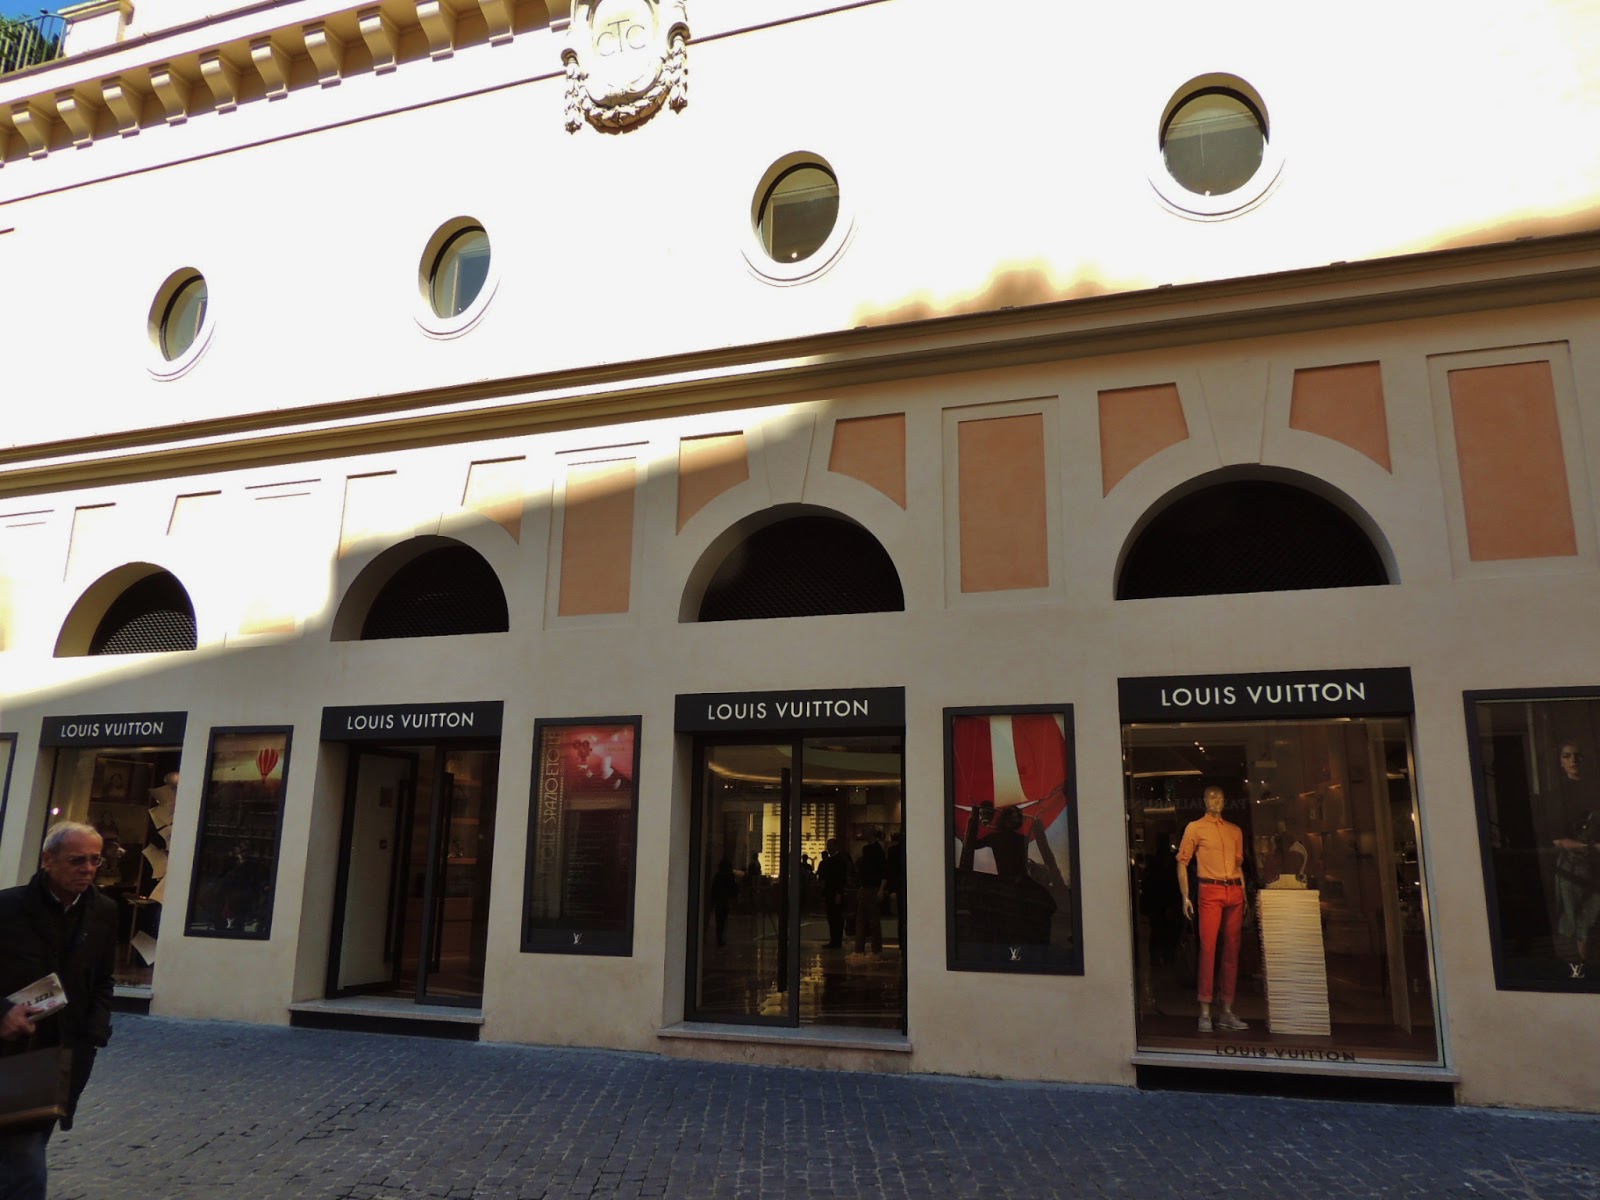 Crazy Louis Vuitton Store In Rome, Italy